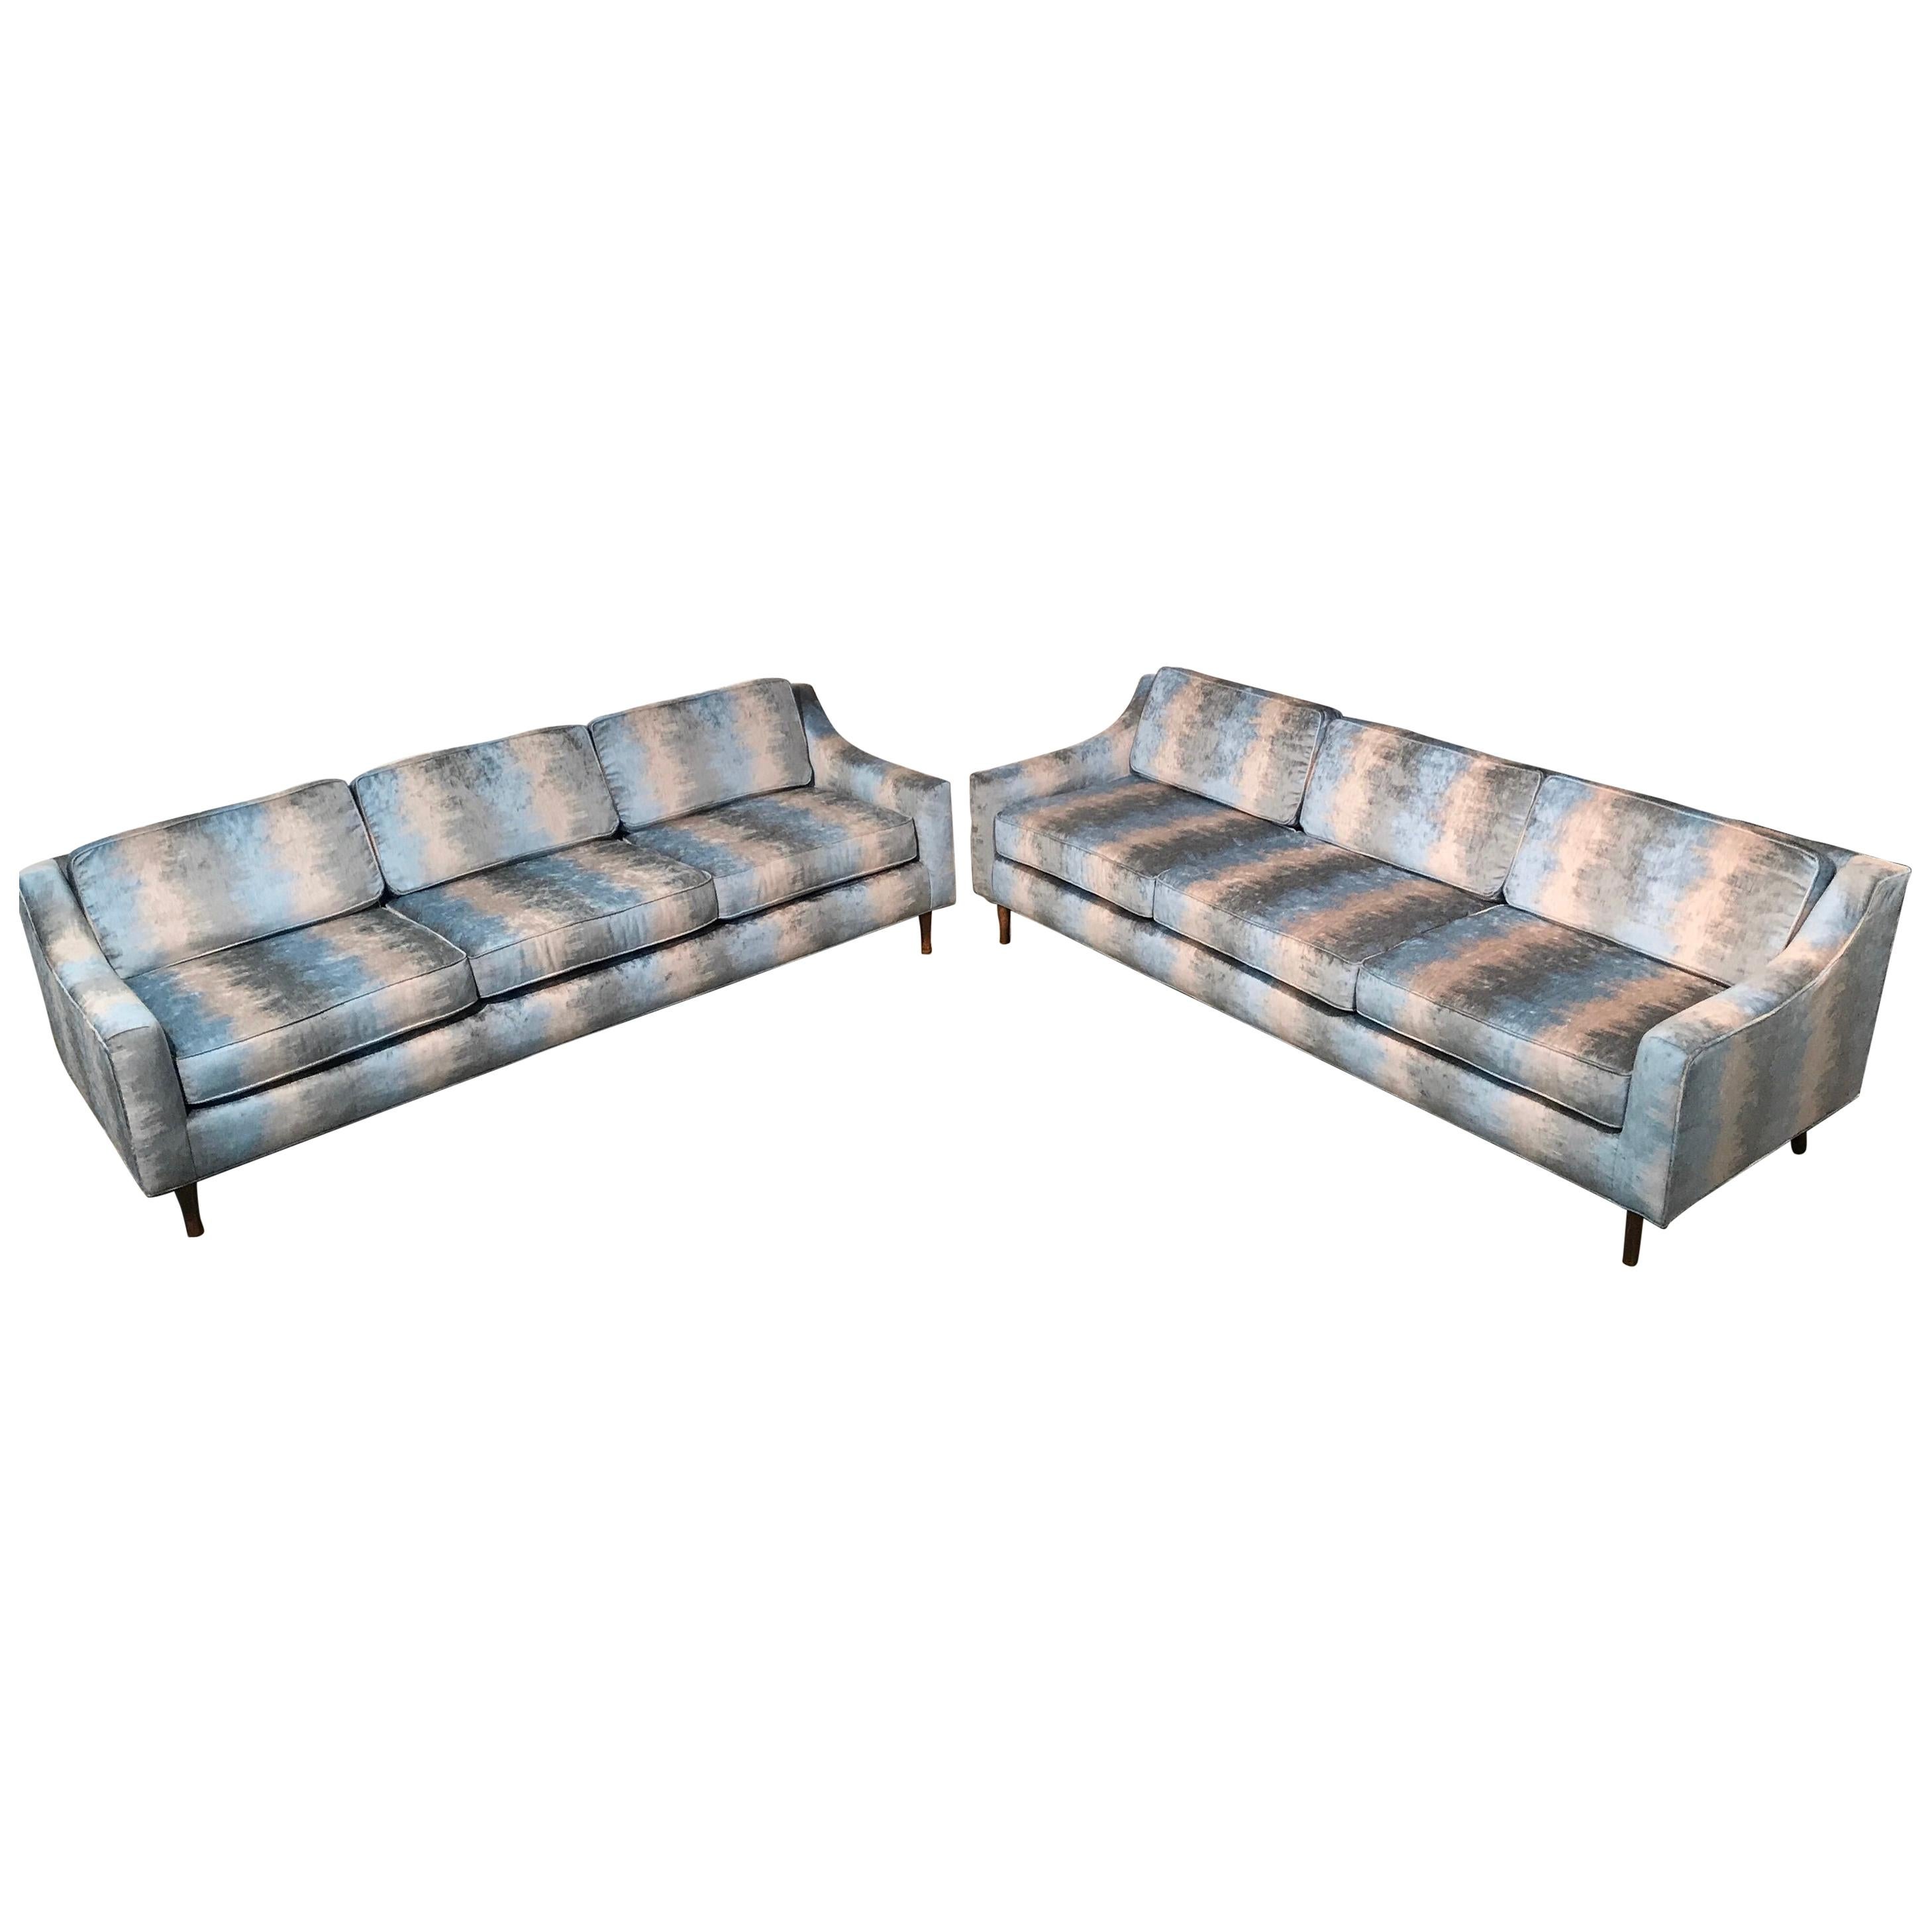 Matching Pair of Fully Restored Mid-Century Modern Vintage Sofas For Sale